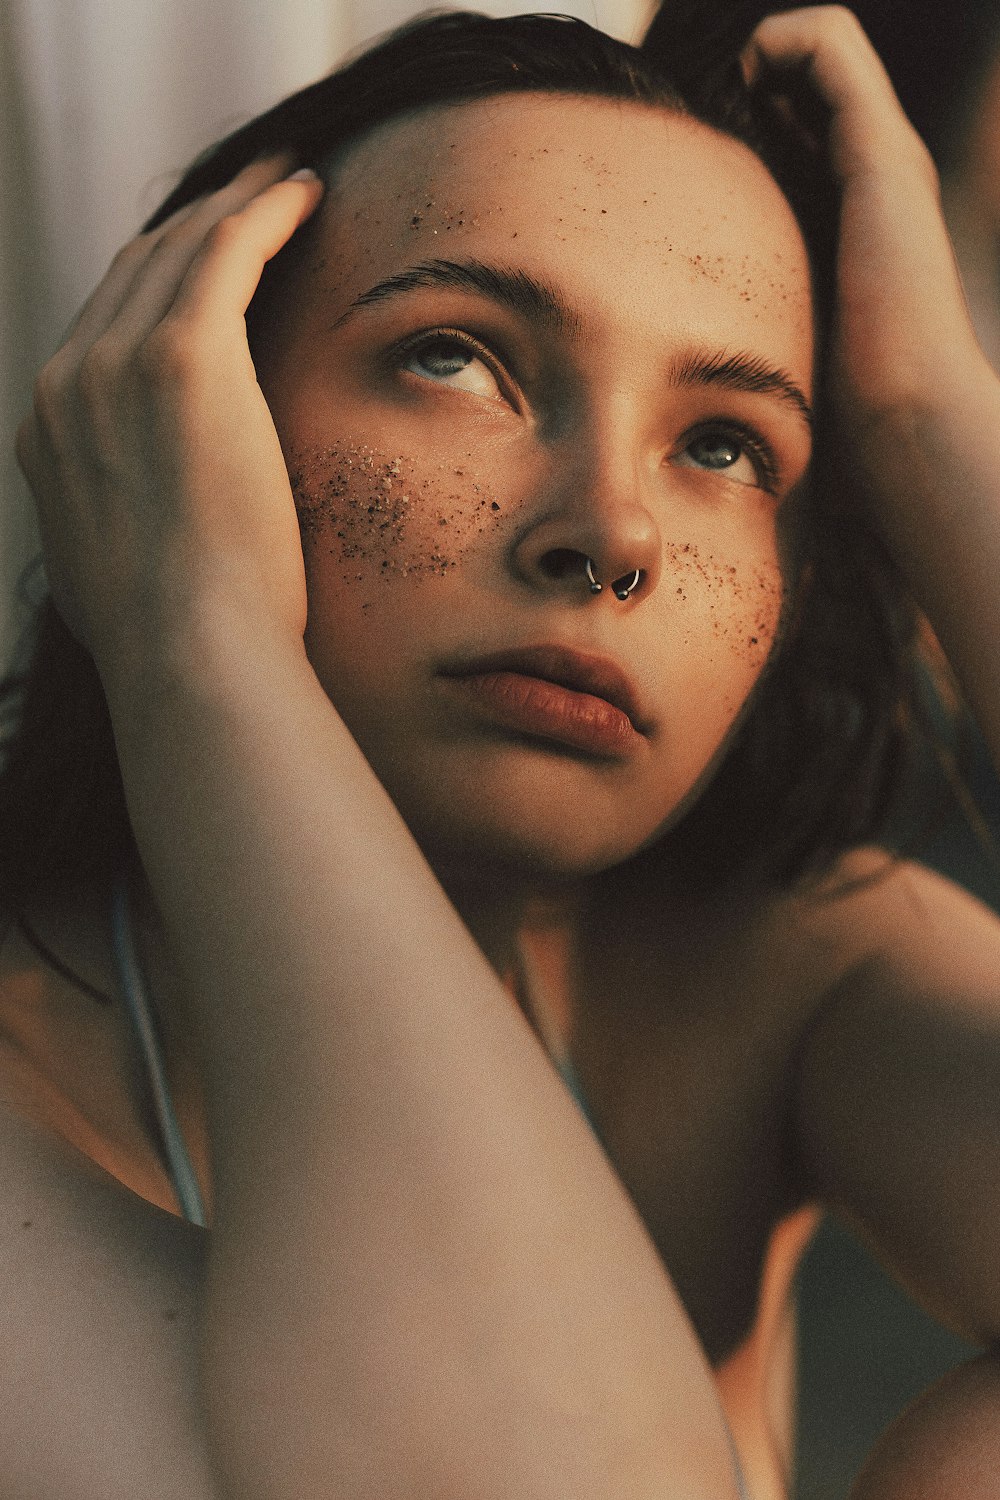 a woman with freckles on her face holding her hair